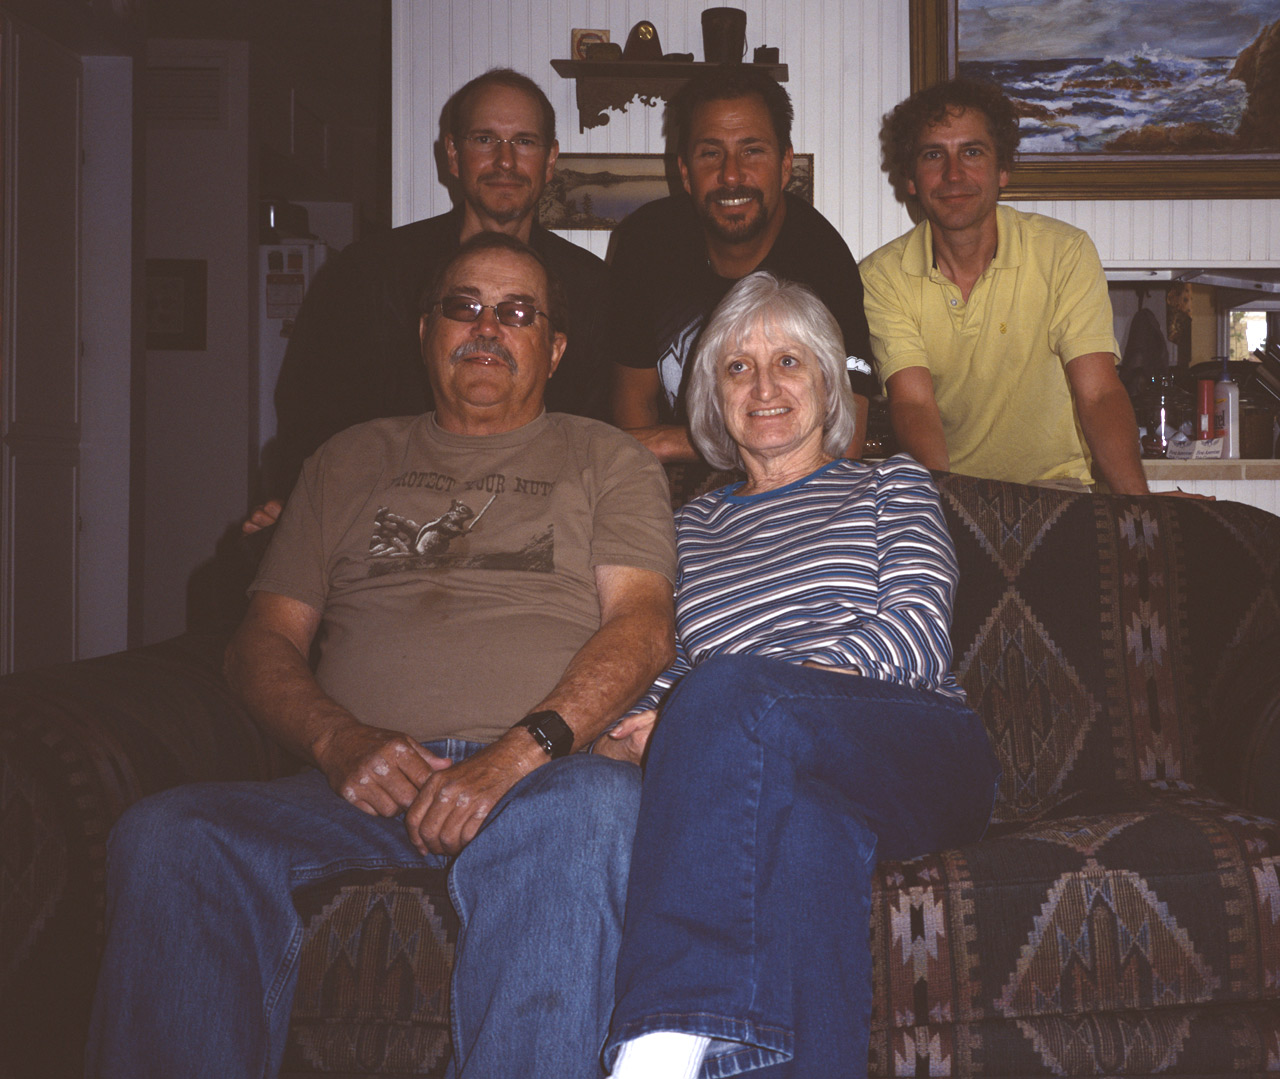 Tom, Lynne, Marc, Uncle Bill, and me in Uncle Bill and Lynne's living room